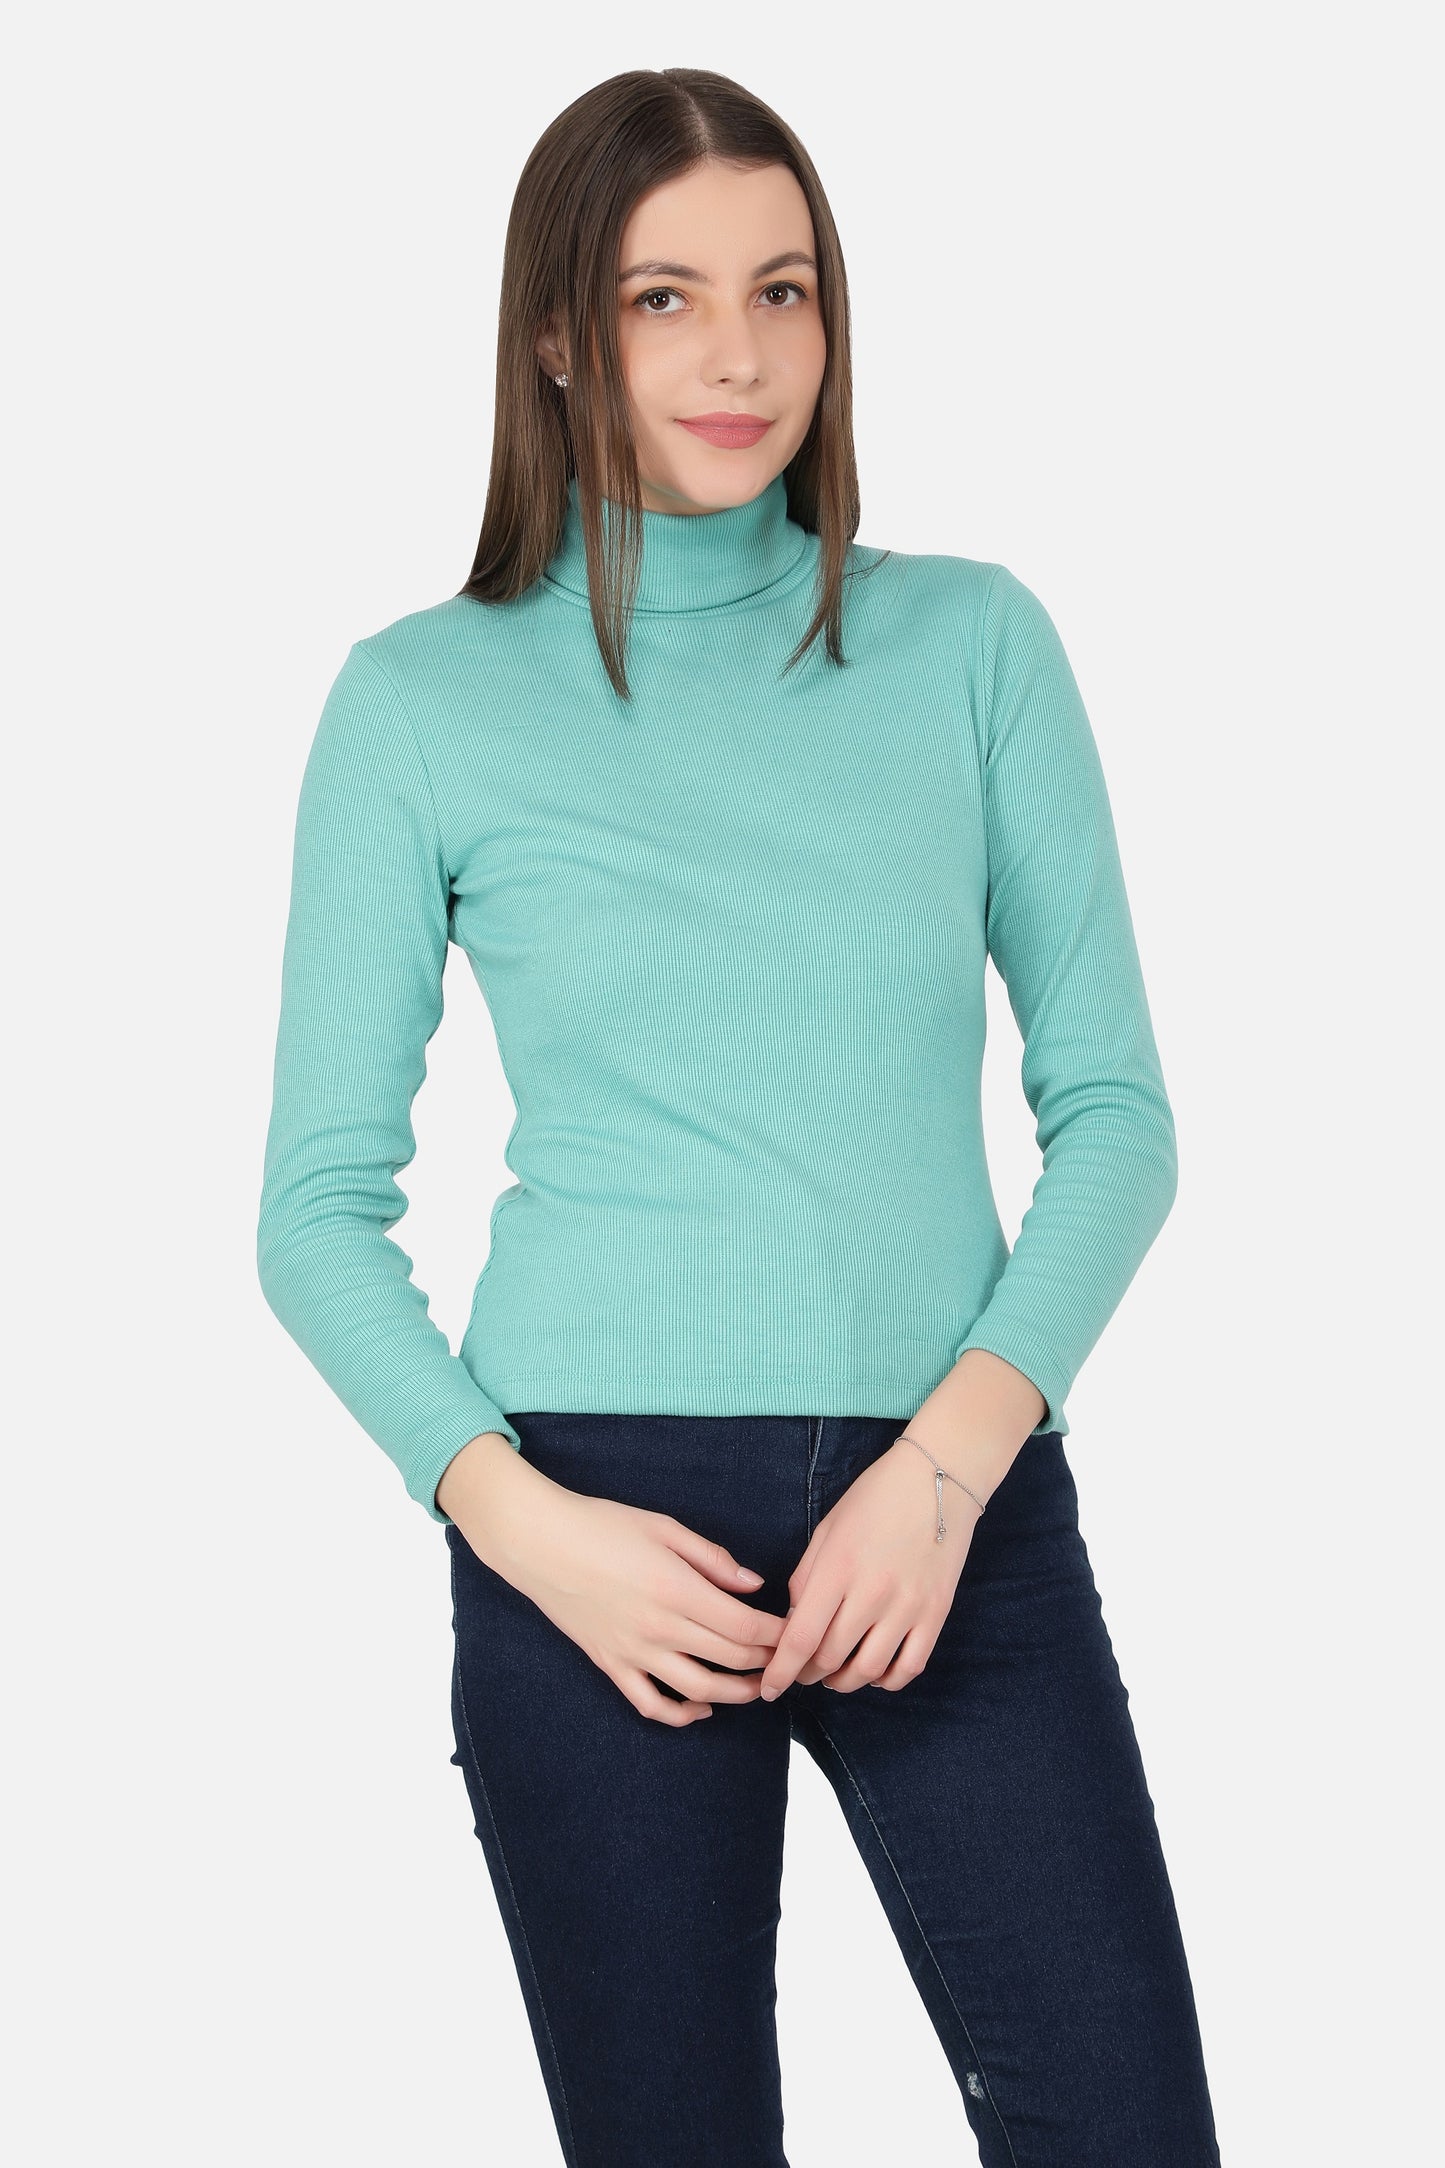 Women Roll-Up Ribbed Solid Aqua High Neck Tops Turtle Neck Top for Women